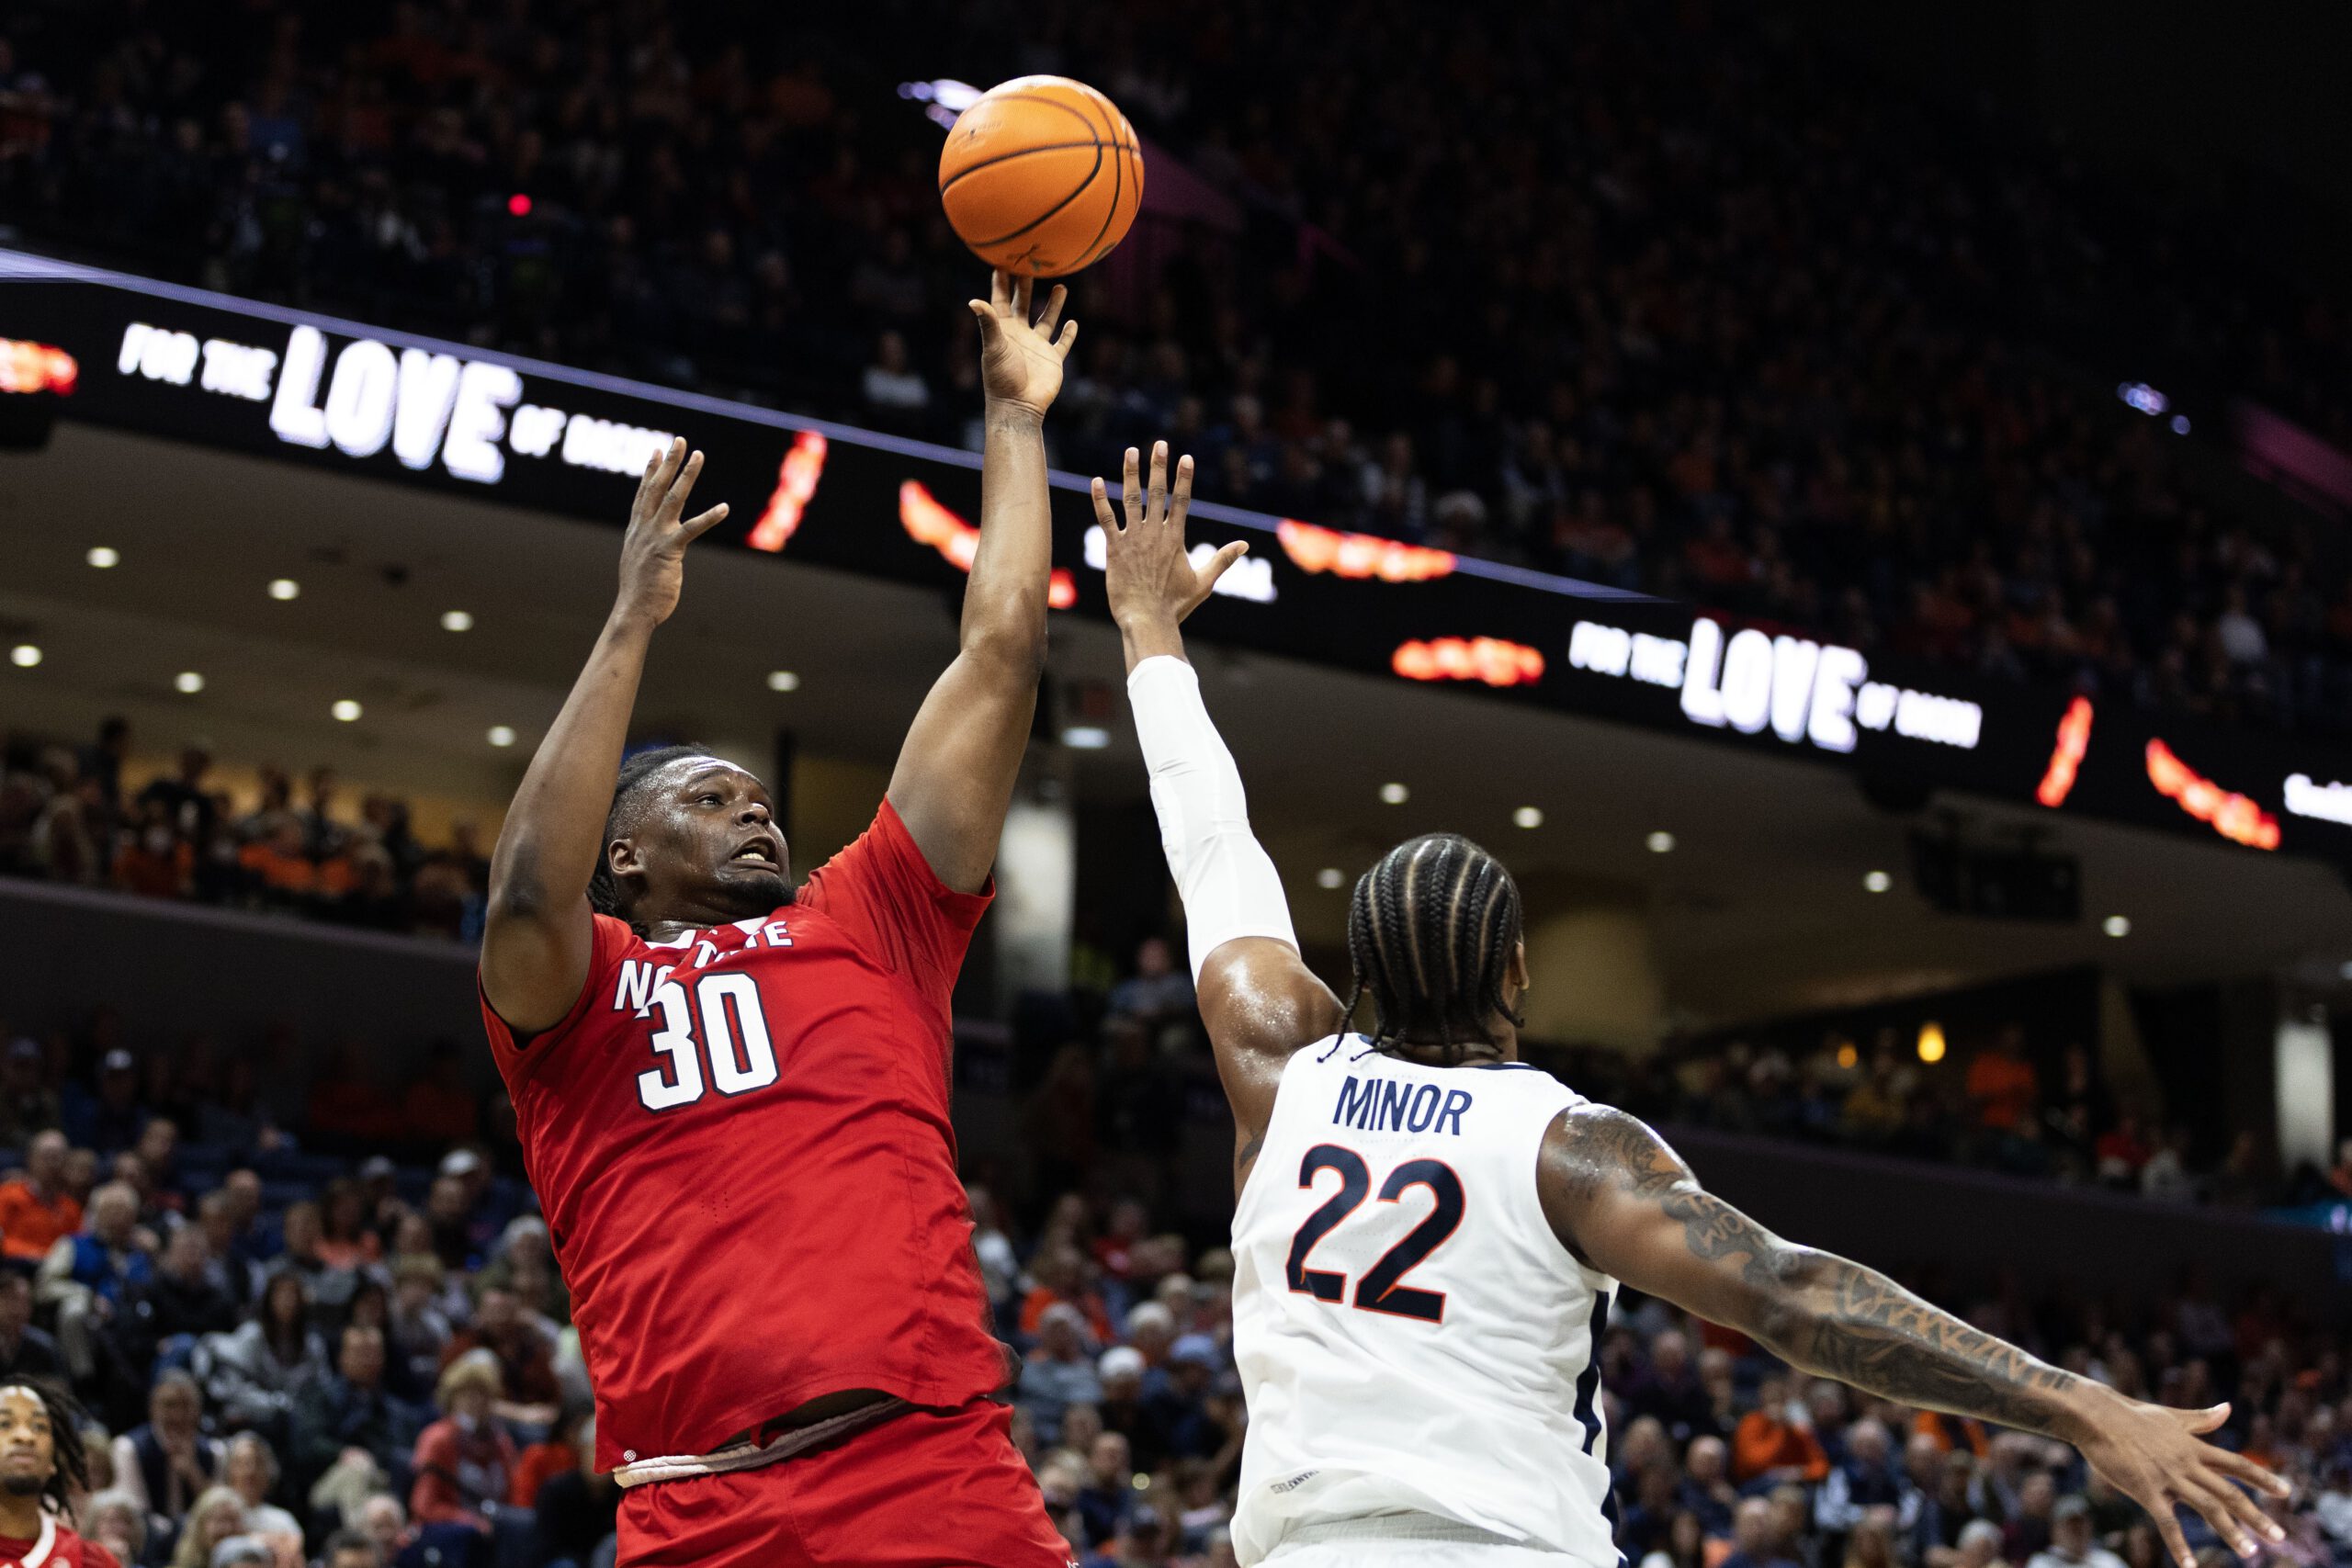 DJ Burns, Jr. of the NC State Wolfpack shoots over Jordan Minor of the Virginia Cavaliers in the first half during a game at John Paul Jones Arena on January 24, 2024, in Charlottesville, Virginia.